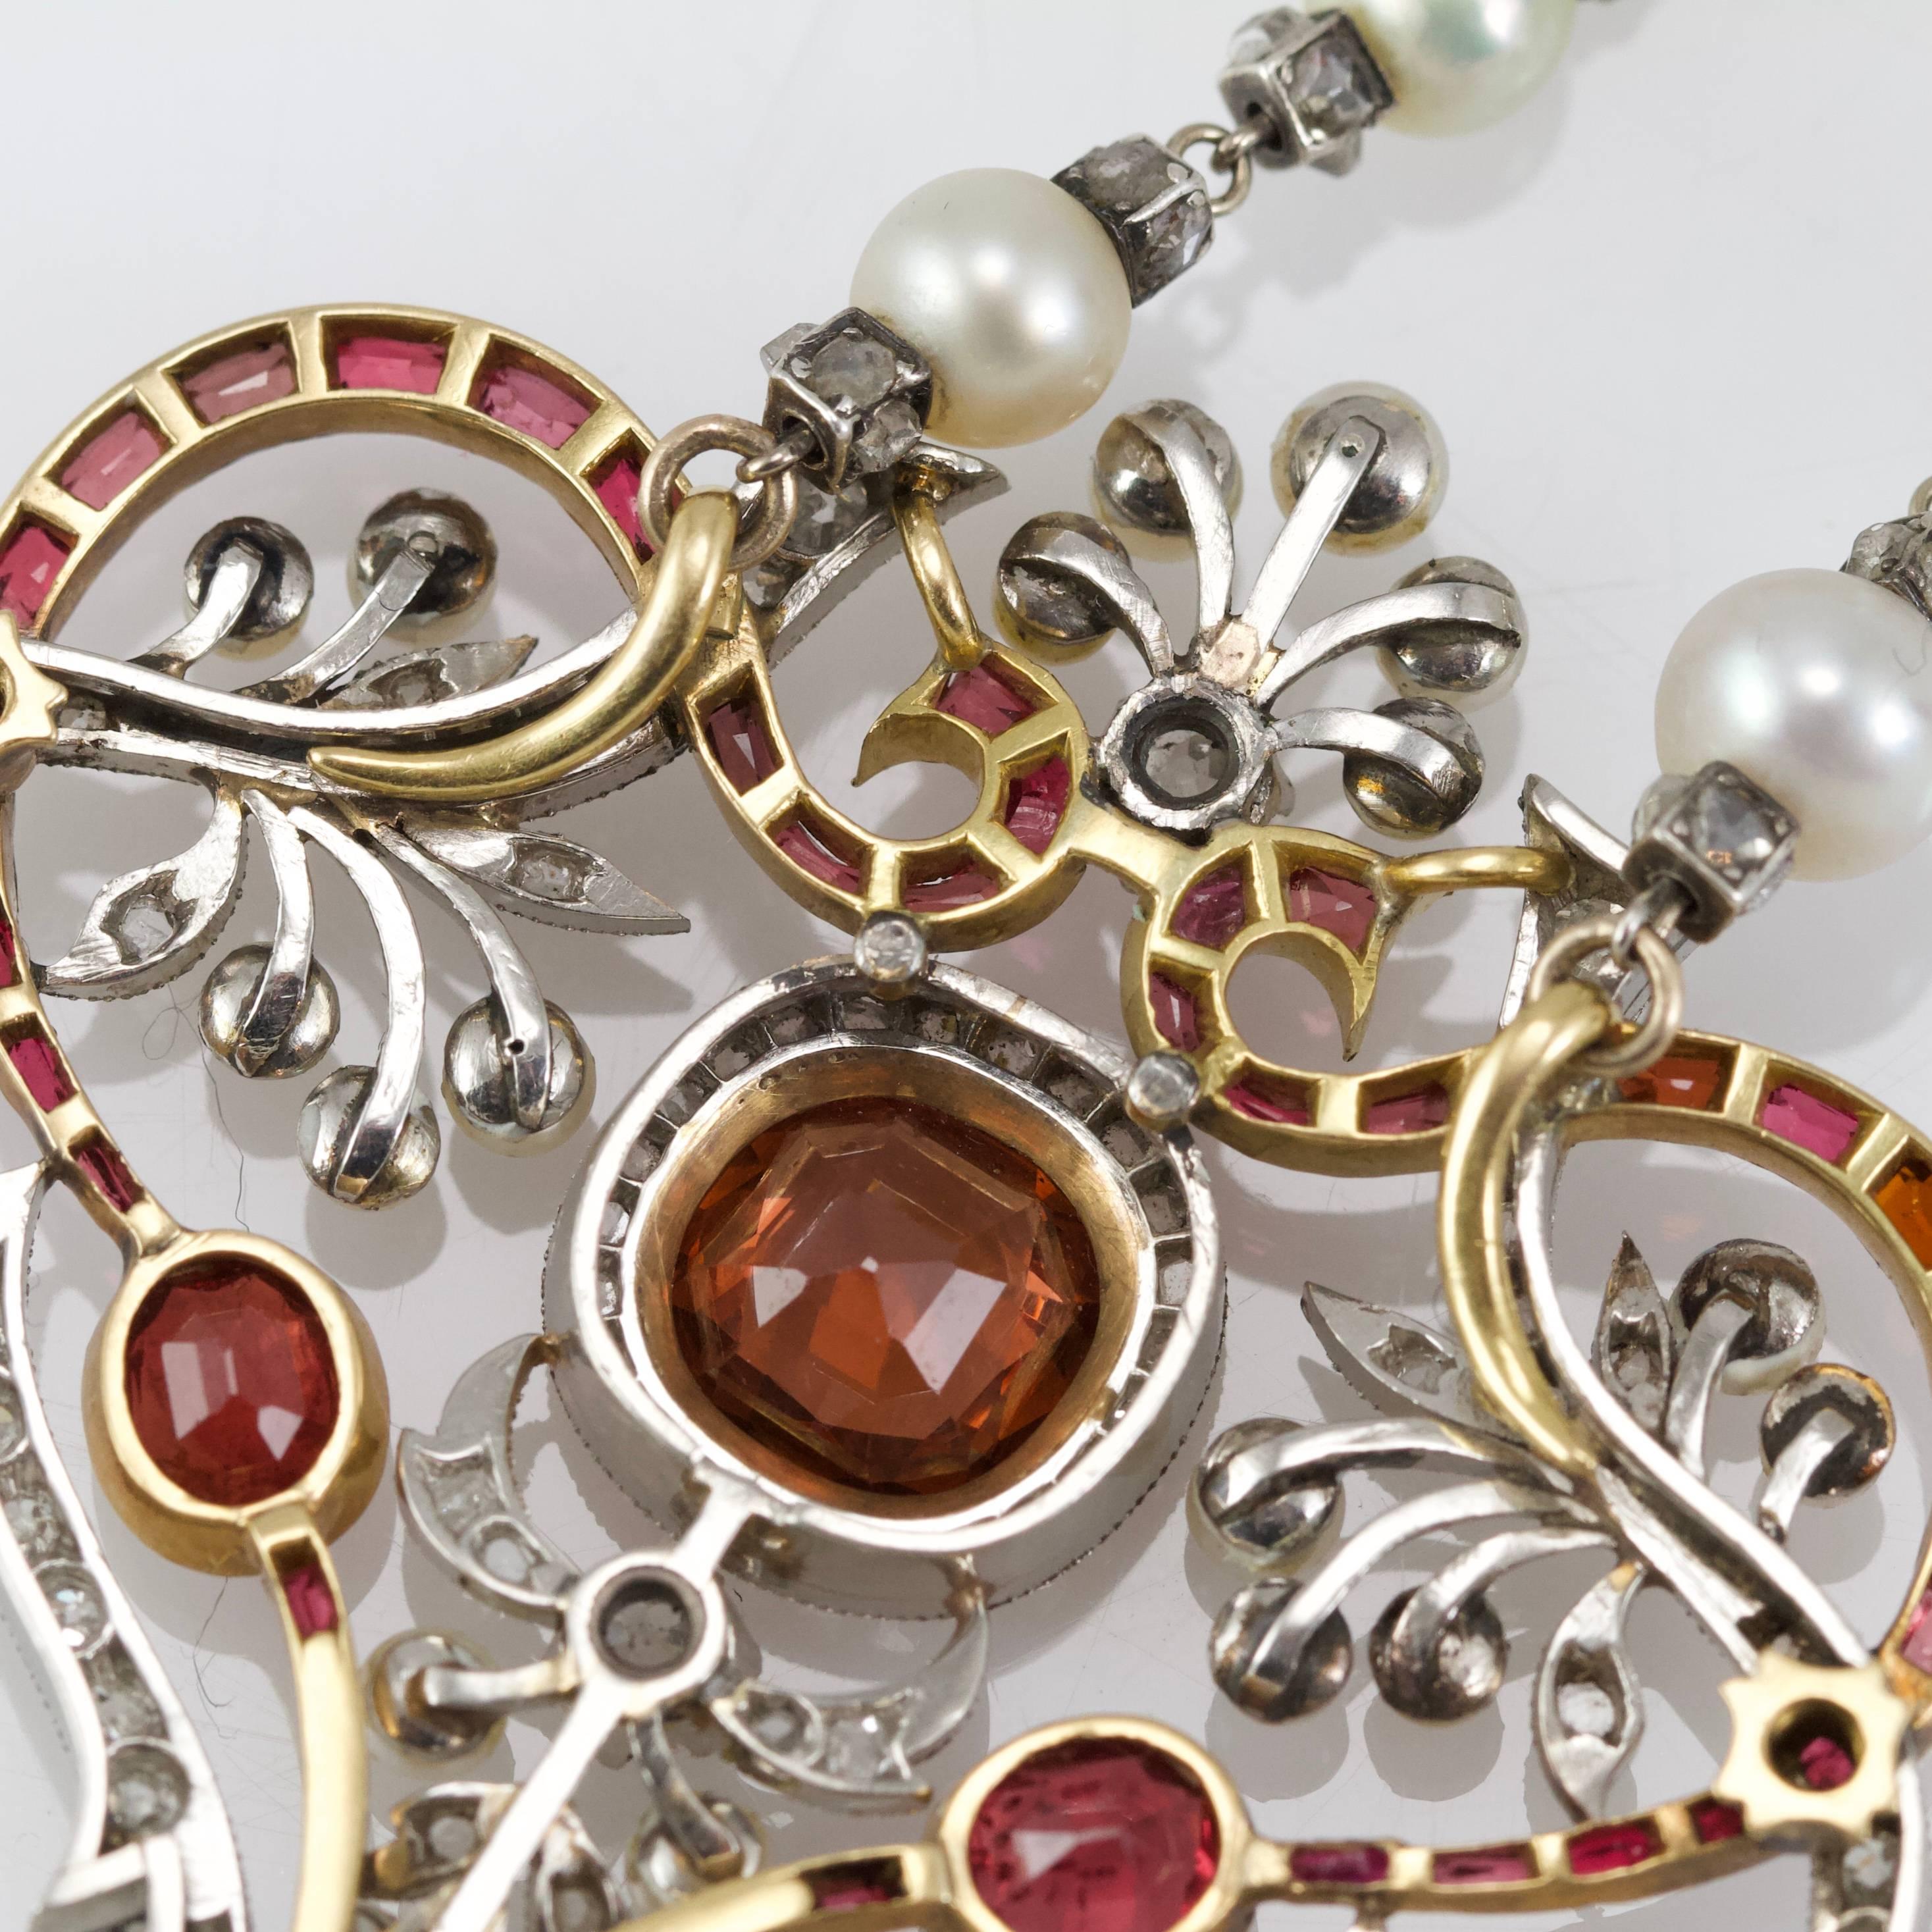 Belle Epoque Diamond, Spinelle, Garnet and Pearls Necklace from Paris 2